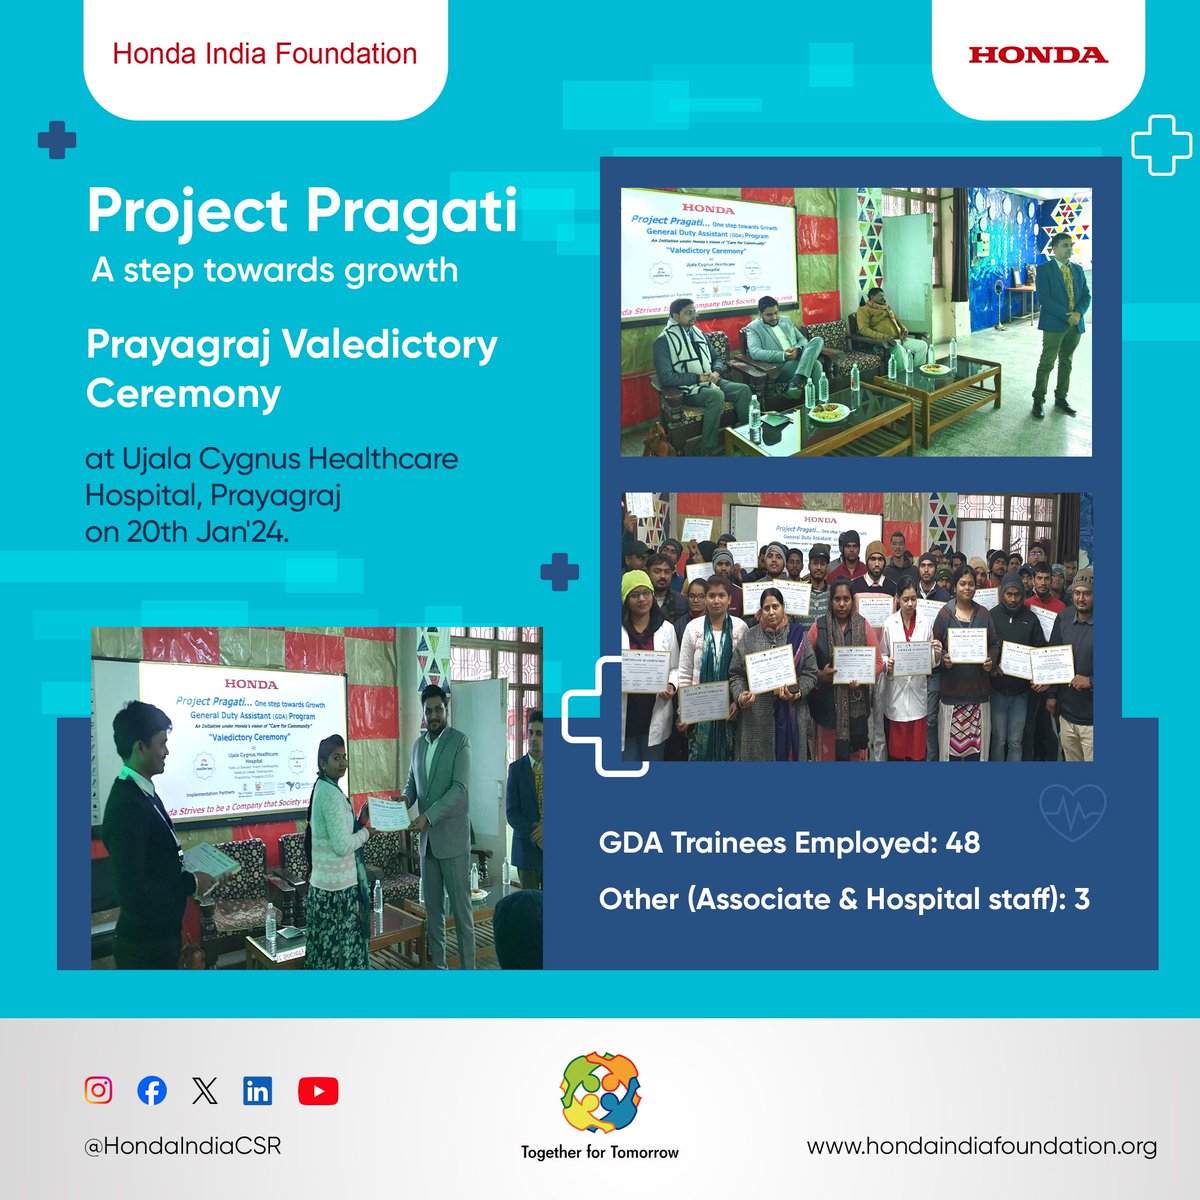 Phase I of the General Duty Assistant (GDA) Program covered 20 locations, 1,000 trainees certified, with 972 securing placements.

In a recent valedictory session, candidates were certified in Chennai, Prayagraj, Indore, Muzaffarpur & Satna. #ProjectPragati #HondaIndiaFoundation